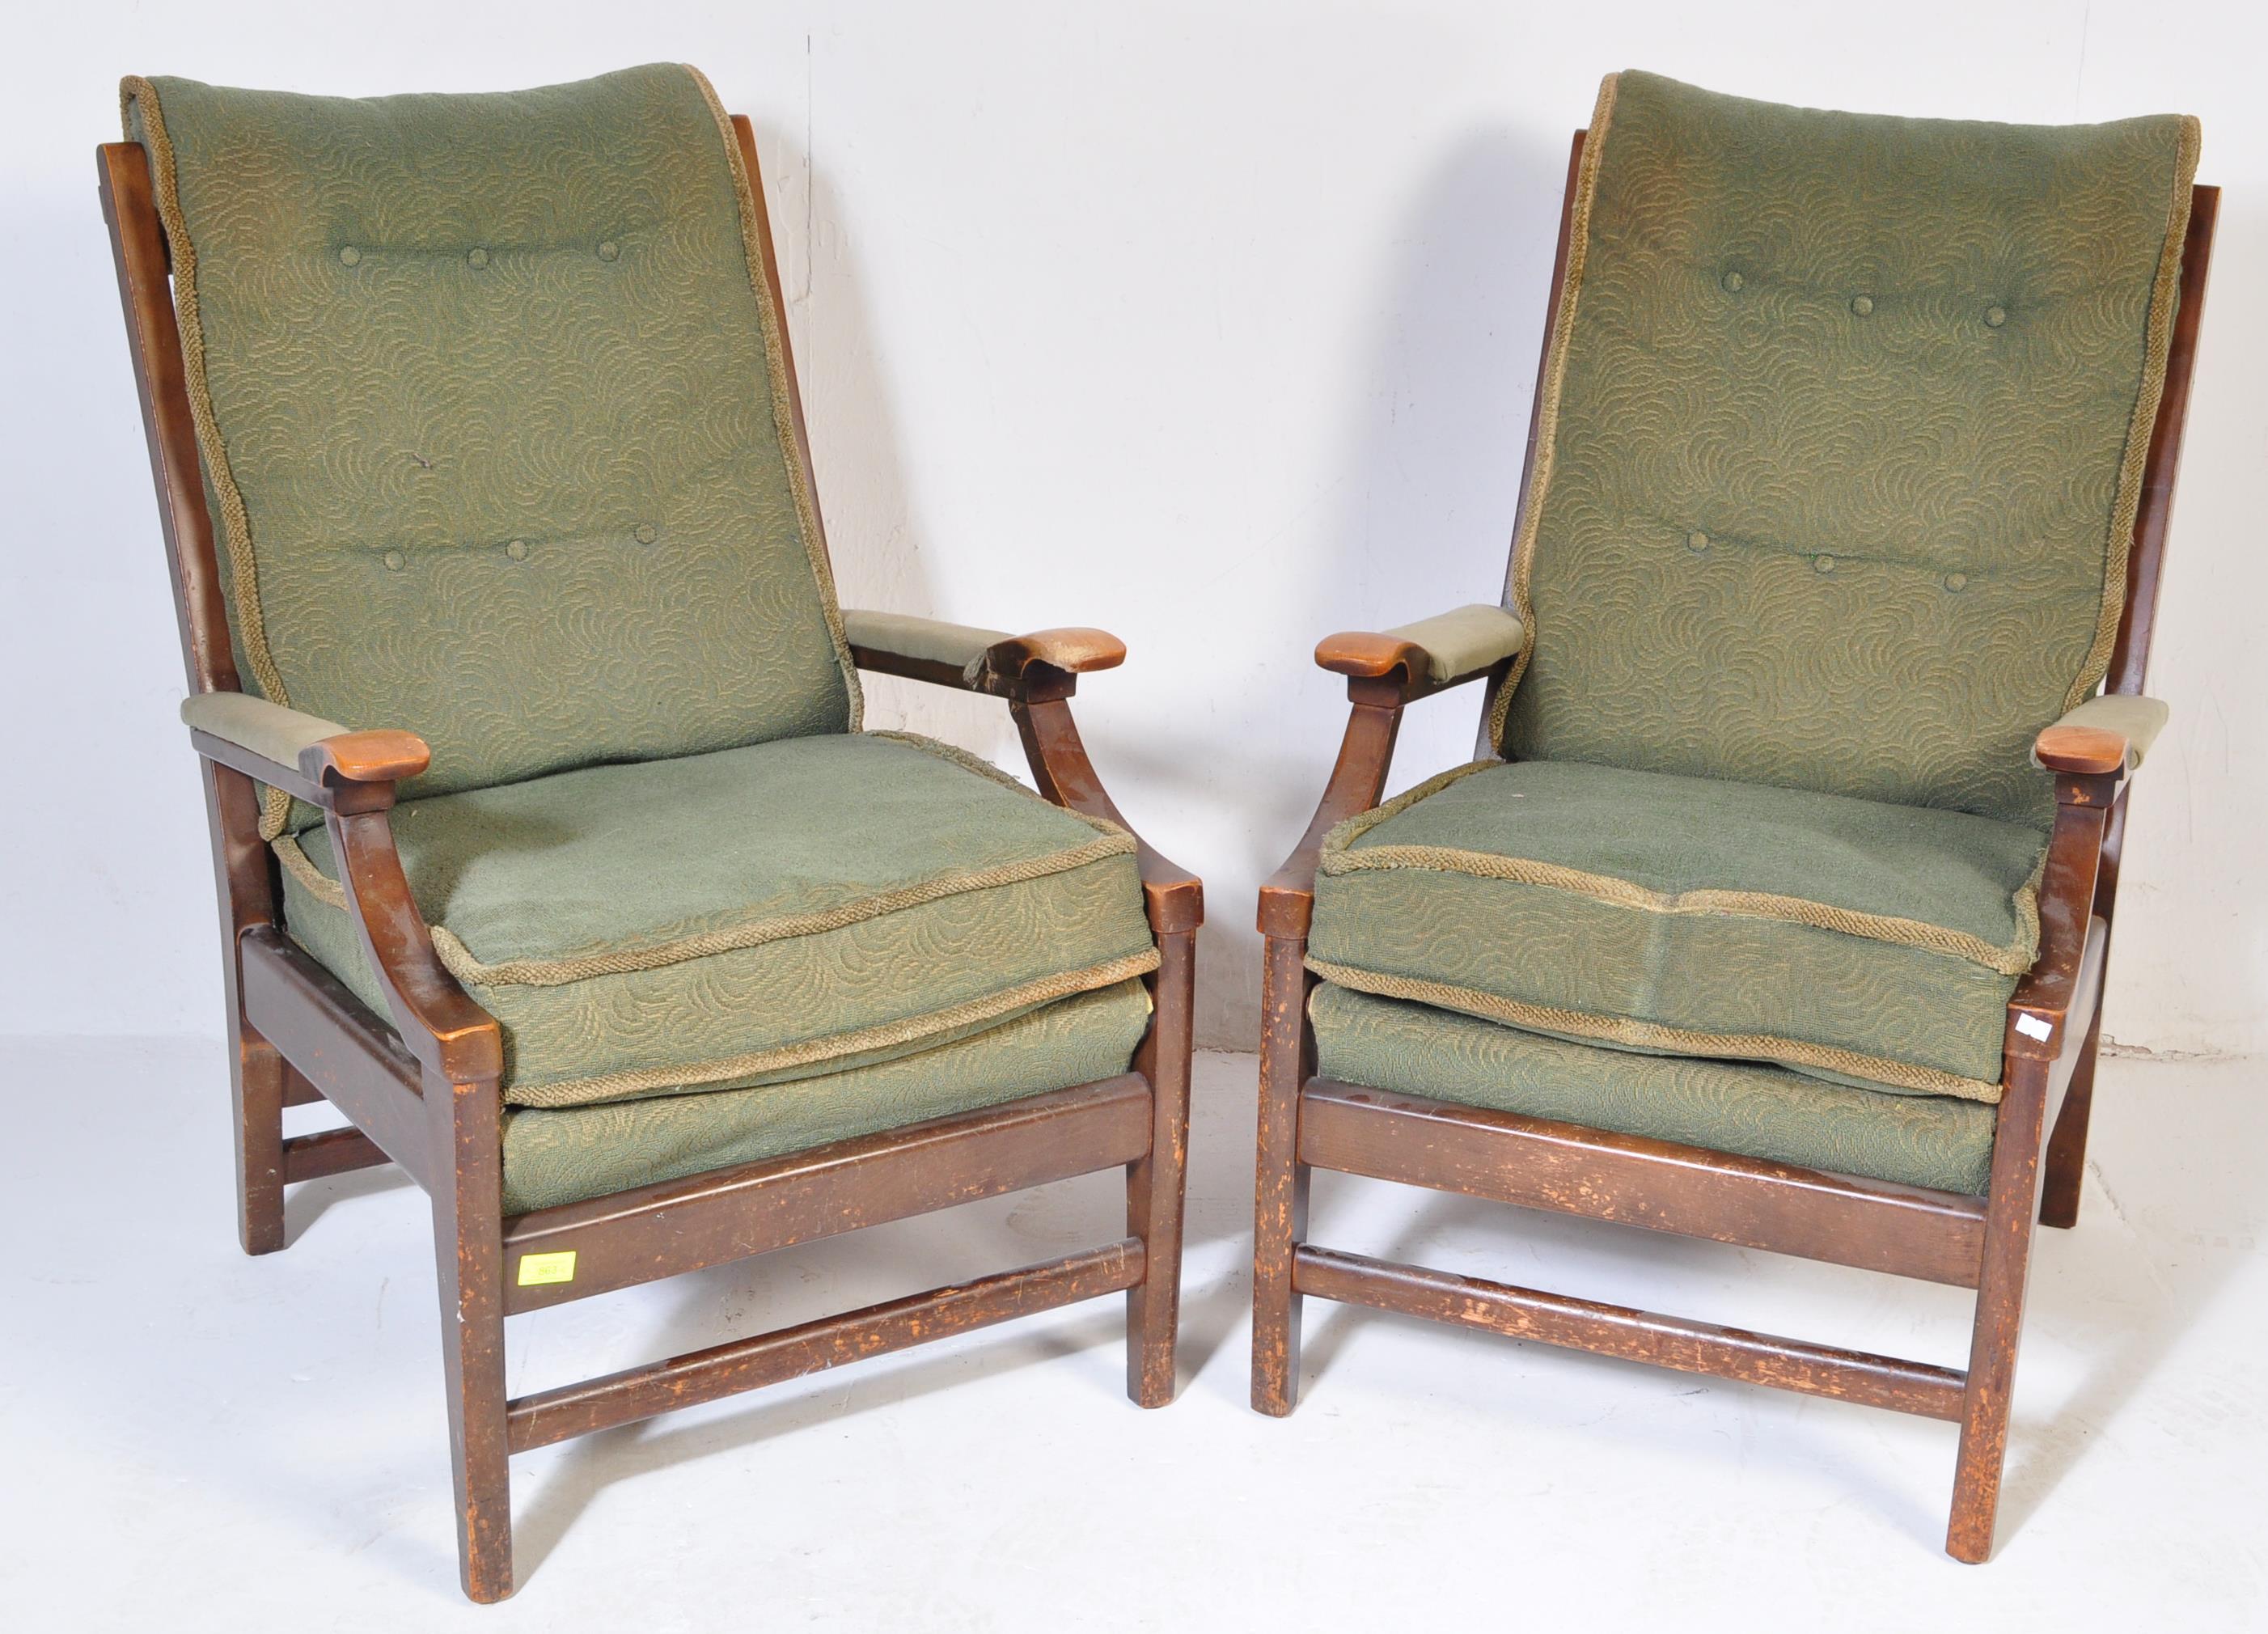 CINTIQUE - PAIR OF RETRO MID 20TH CENTURY ARM CHAIRS - Image 2 of 6